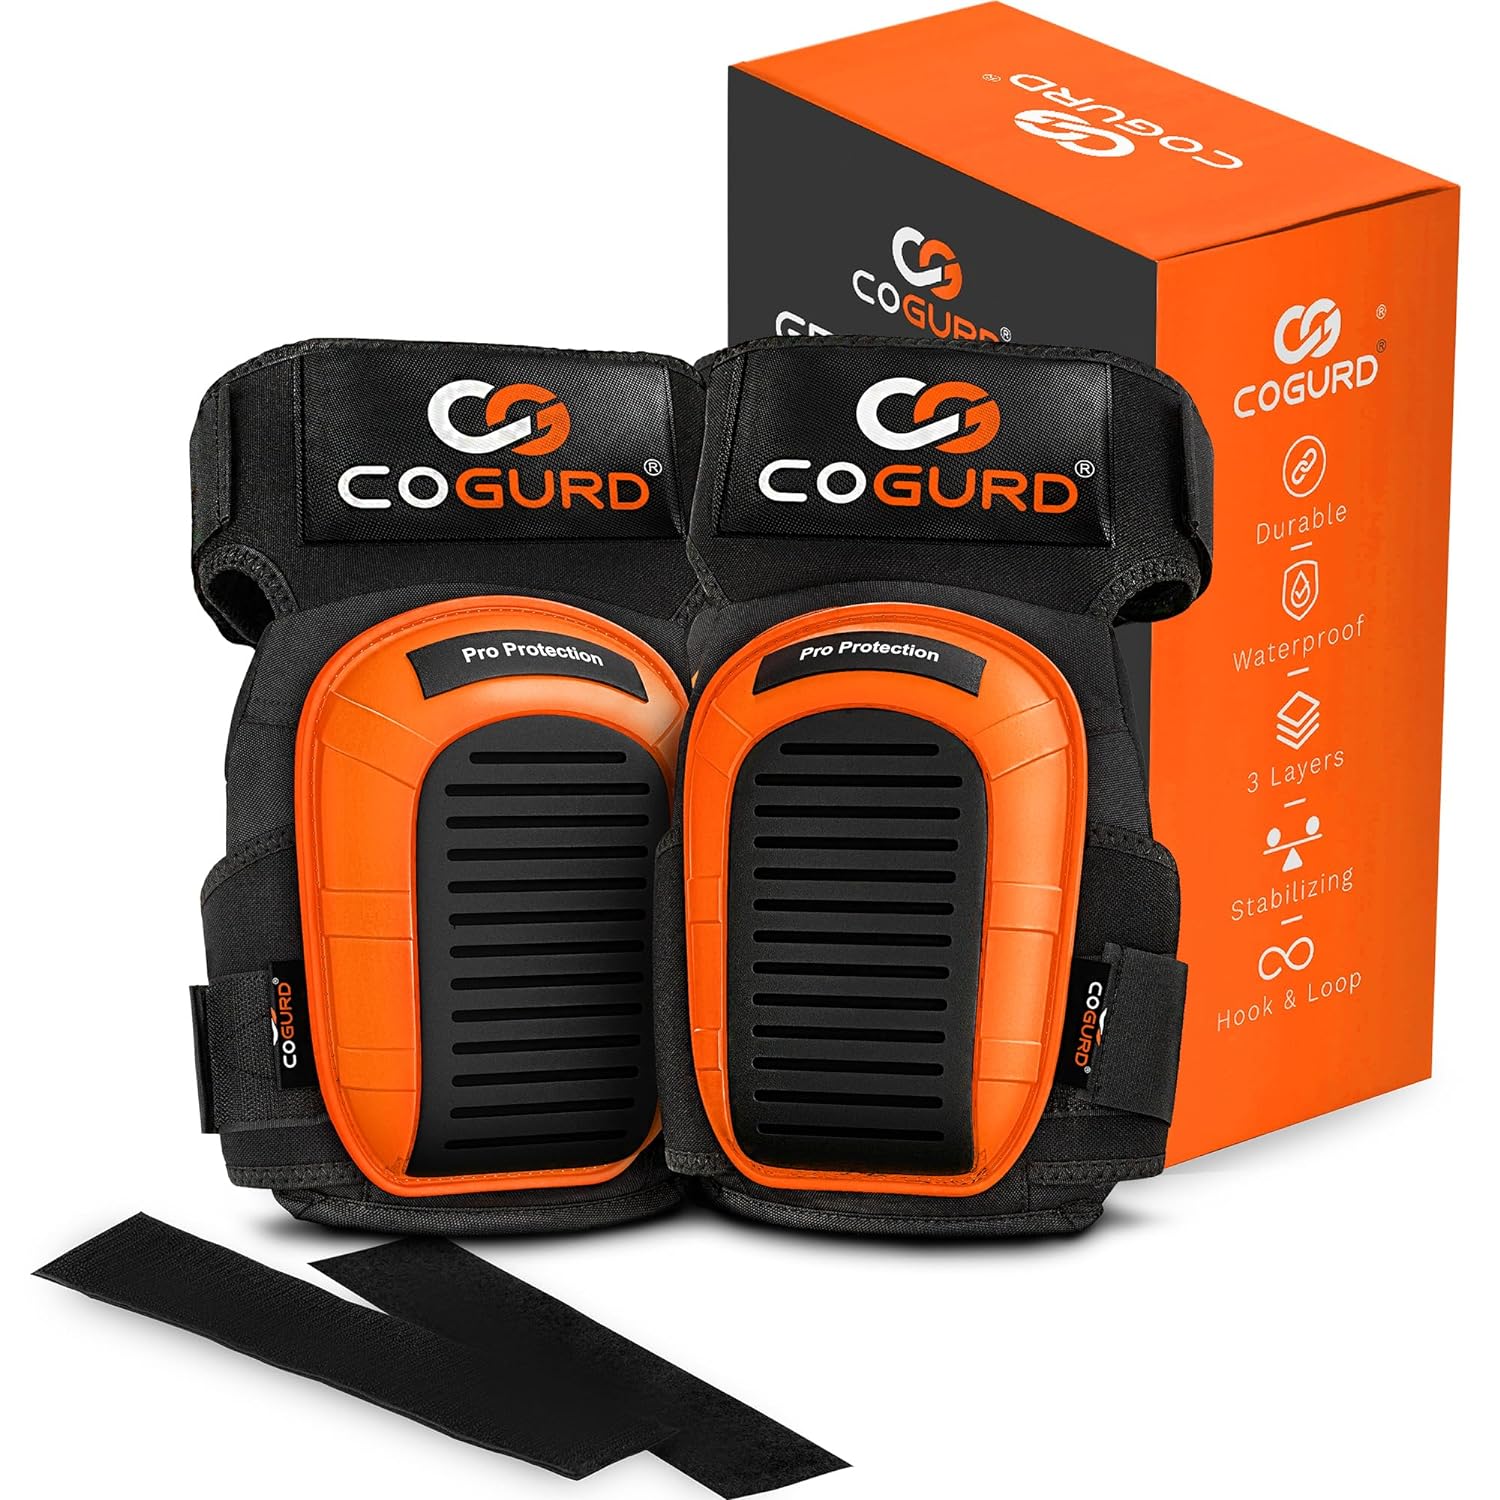 COGURD Knee pads for Men, Perfect for Construction, Work, Flooring, Gardening, Cleaning, Tiling - Knee Pad with Soft Gel Cushion - Non-slip Design - Durable Waterproof Material - Fits Men & Women